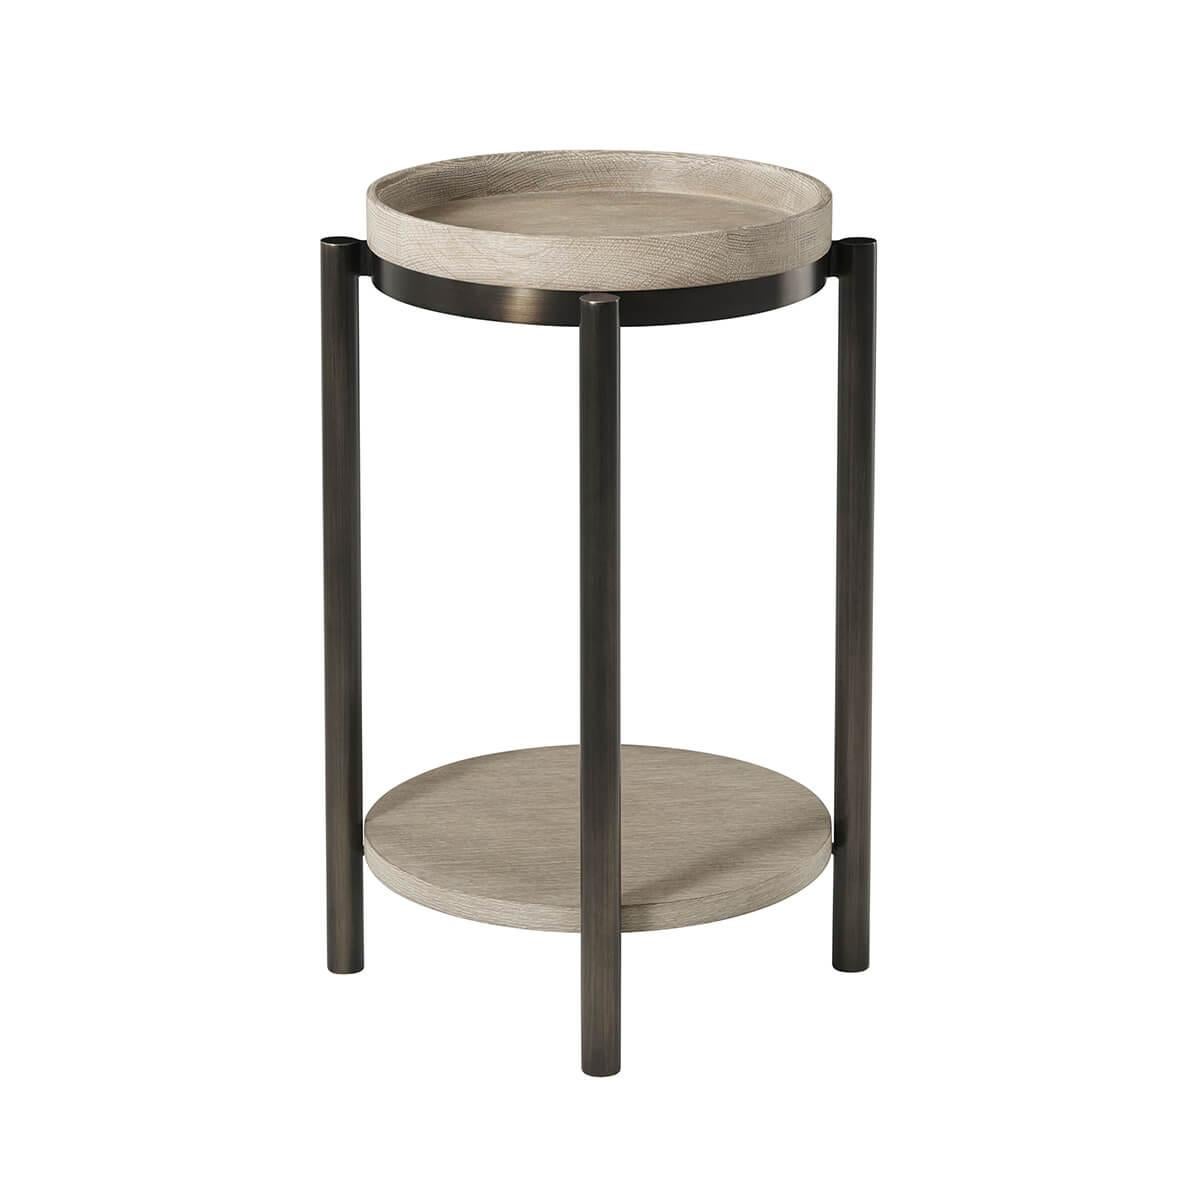 With an oak tray top and contrasting bronzed metal legs, the round side table can also be used as a drink table. With an intensive multi-step hand finish on this piece to bring out the natural wood grain of the wood of our light grey oak